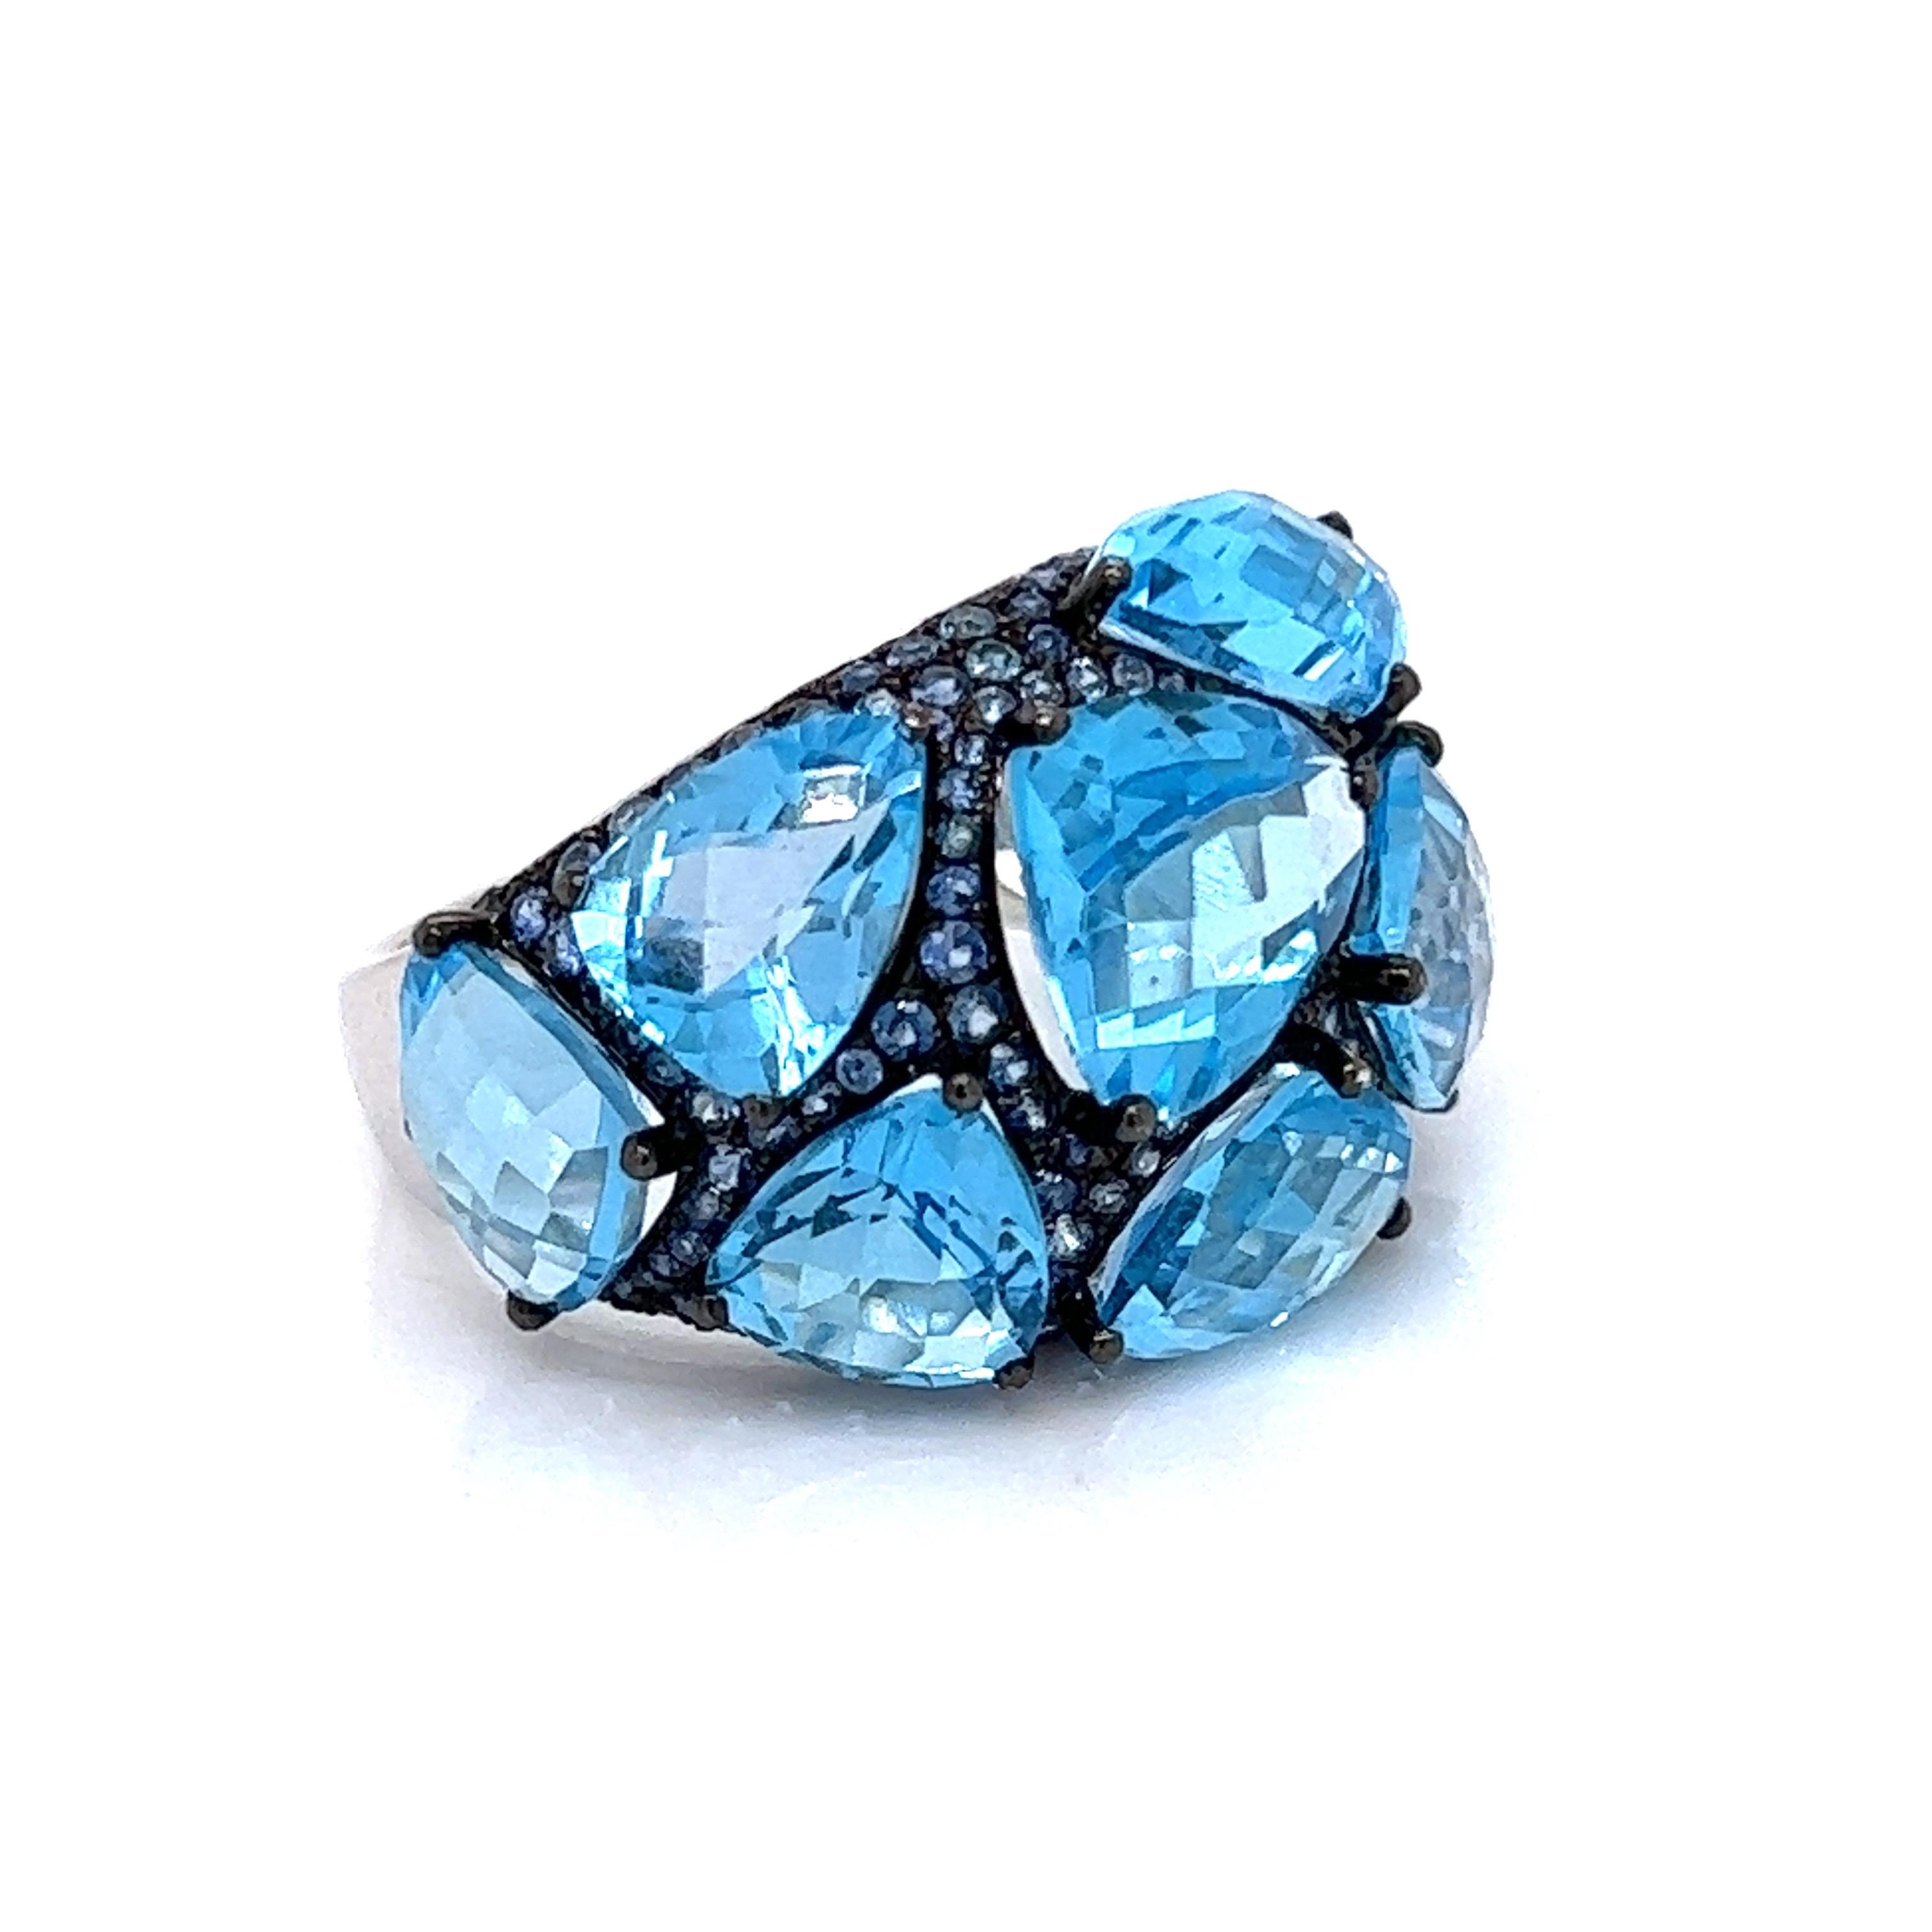 Vibrant and unique, December Birthdays and blue topaz collectors will enjoy this vintage ring.  An irresistible bold design with 9.1 grams of 18 K white gold and contrasting black rhodium.  15.21 cttw of blue topaz and 1.15 cttw blue sapphire. This